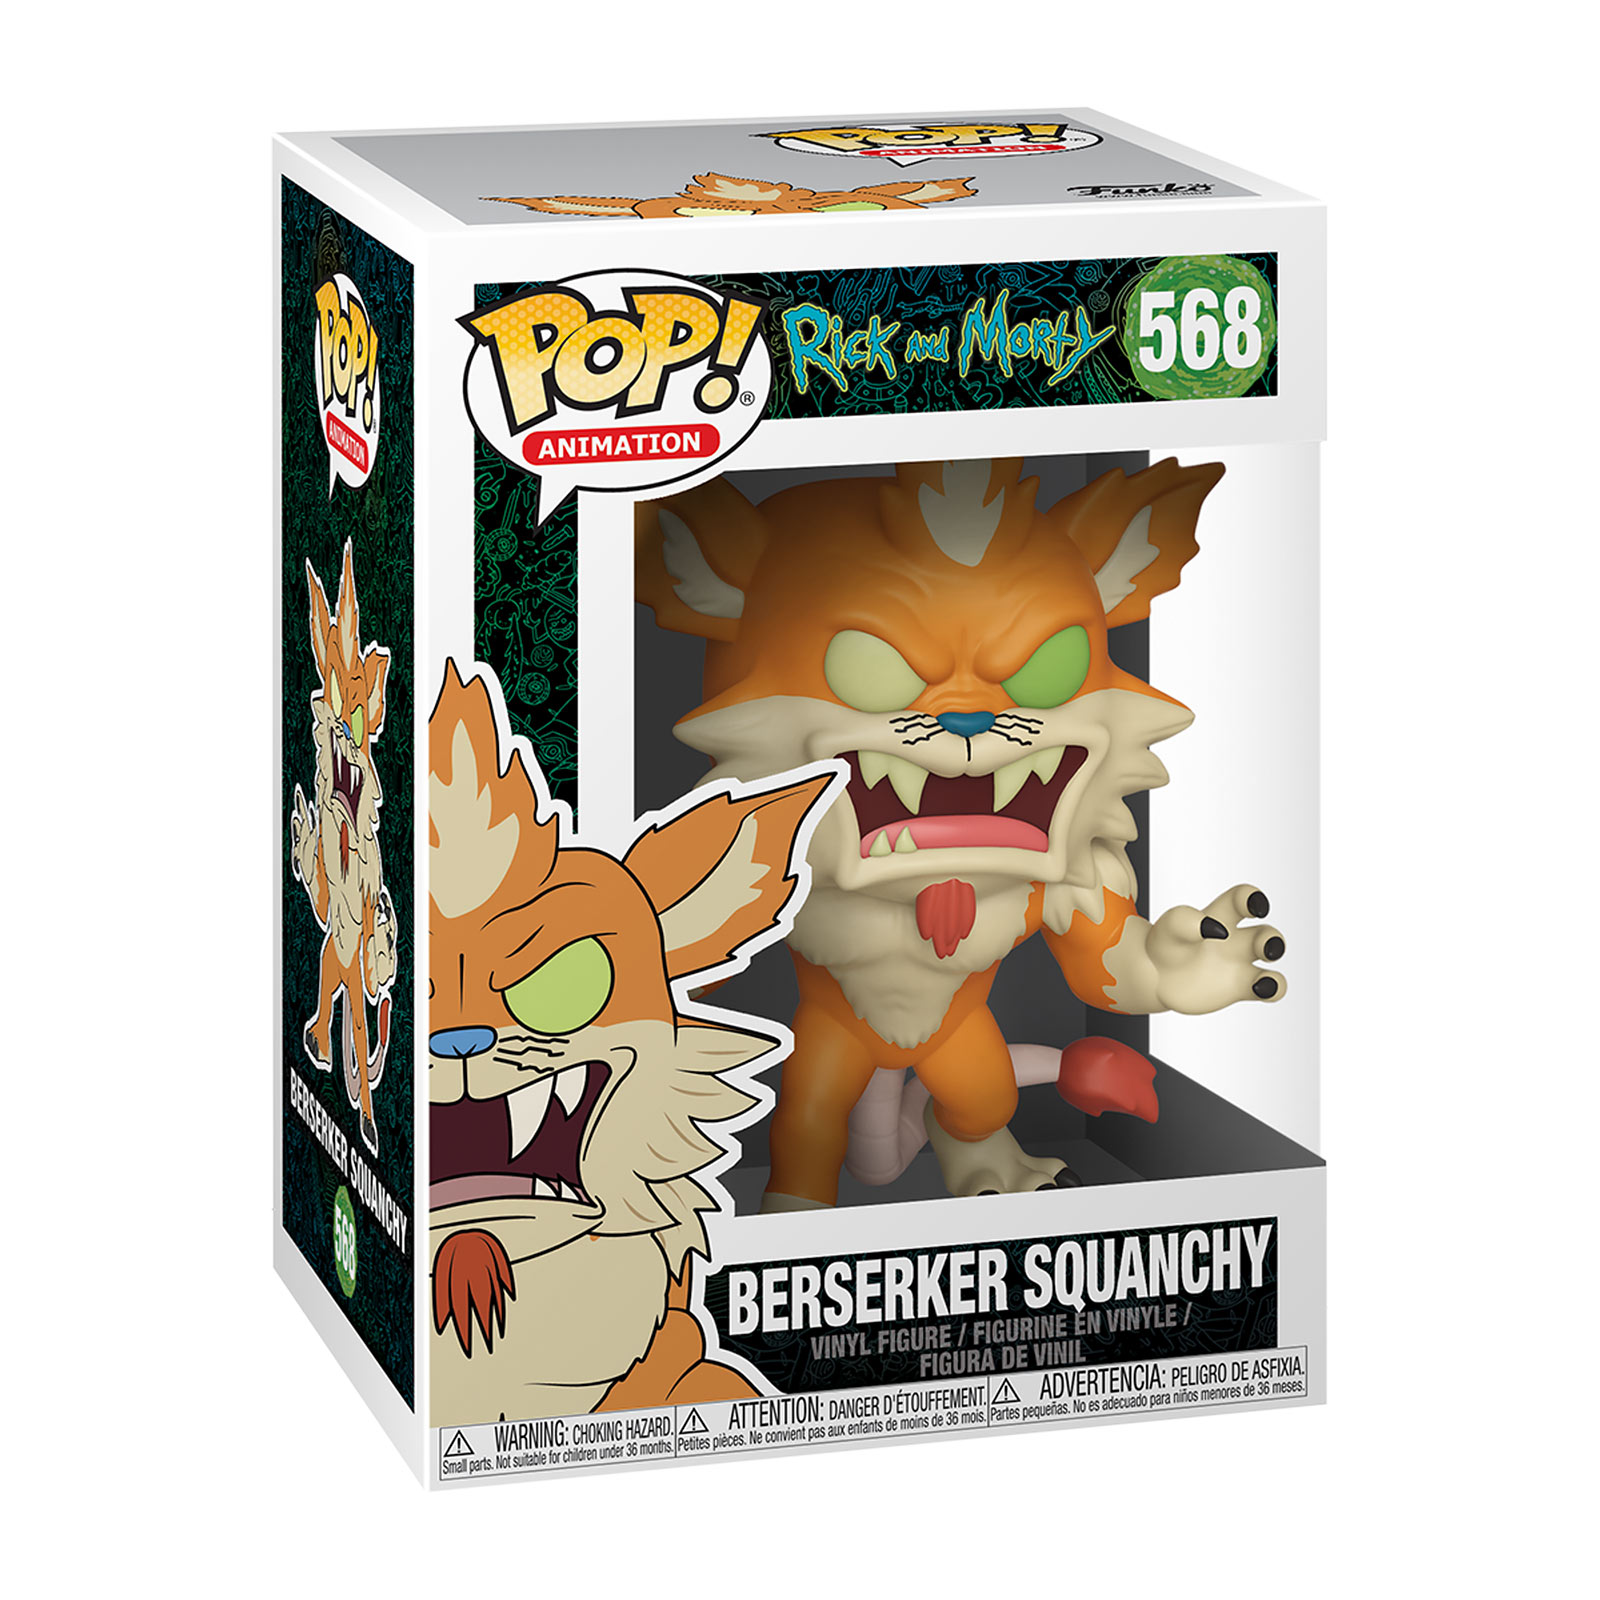 Rick and Morty - Berserk Squanchy Funko Pop figure